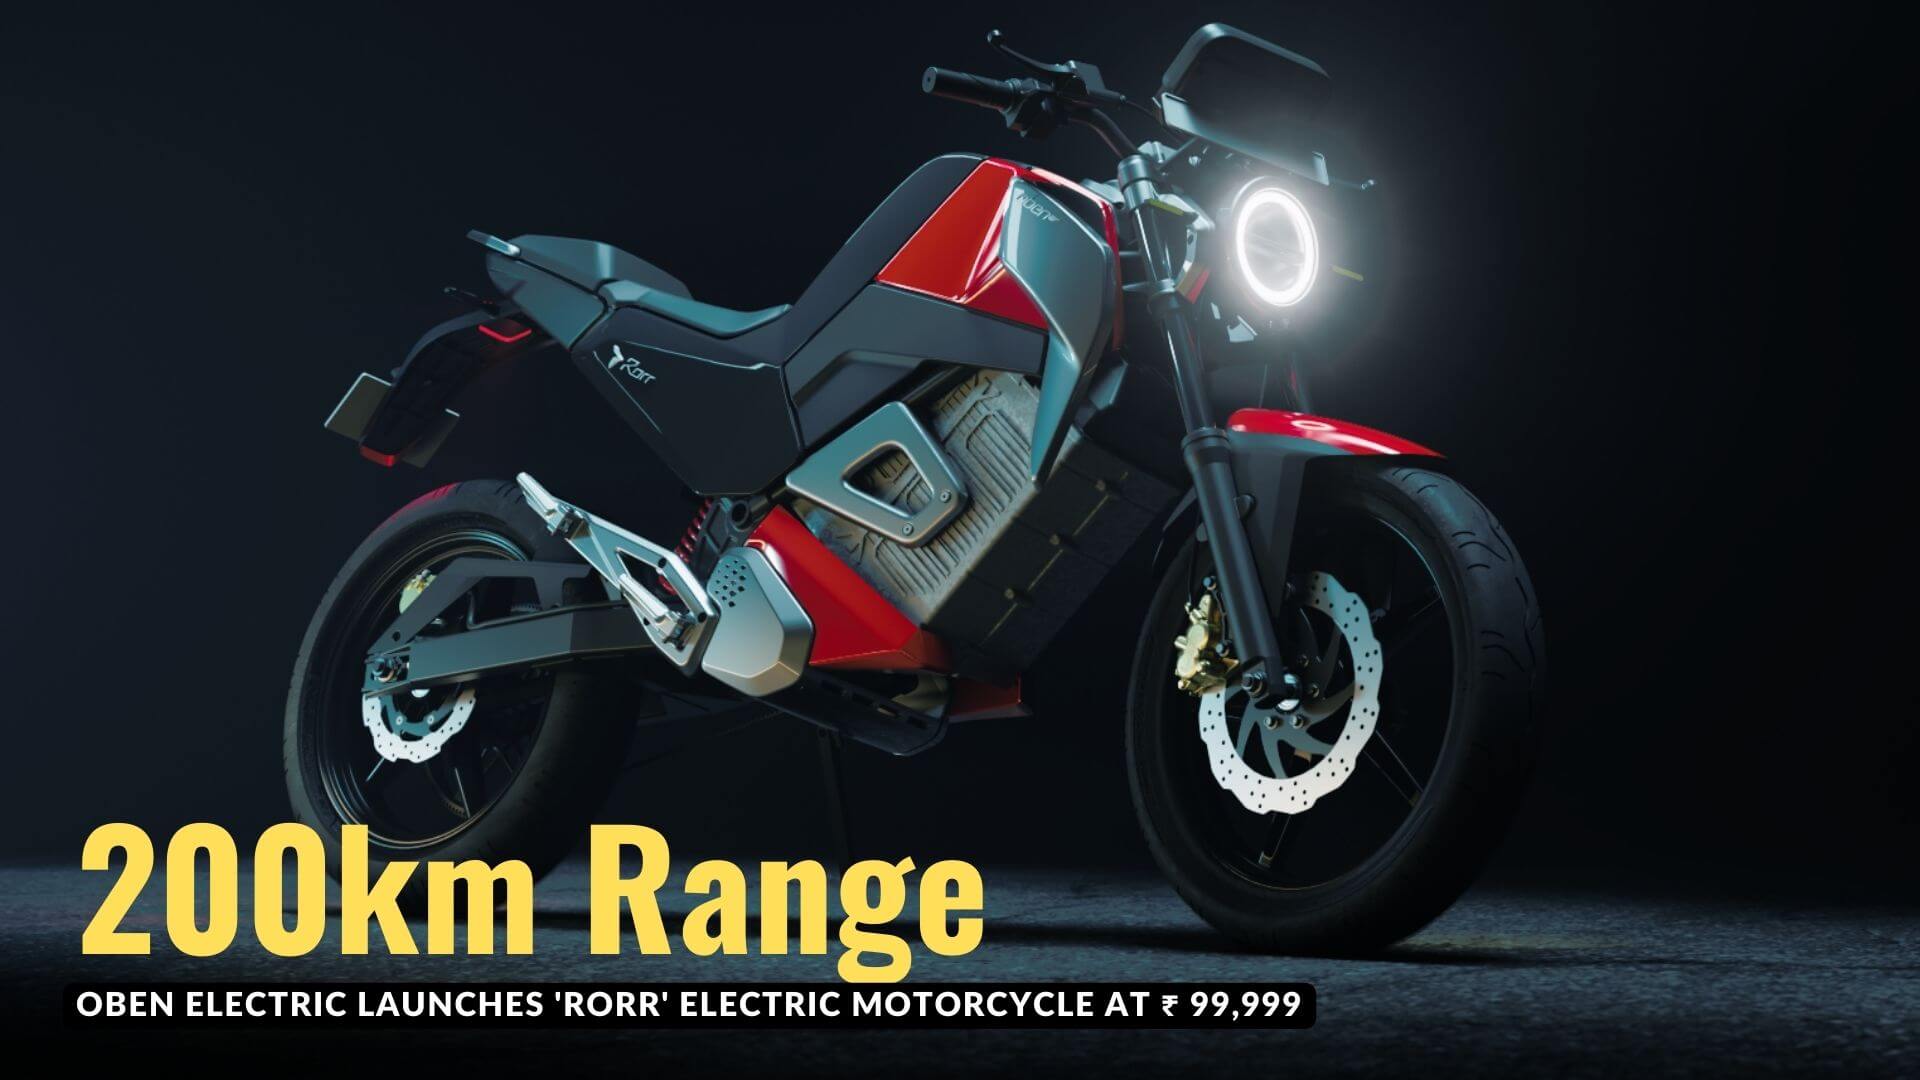 https://e-vehicleinfo.com/oben-electric-launches-rorr-electric-motorcycle-price-and-range/